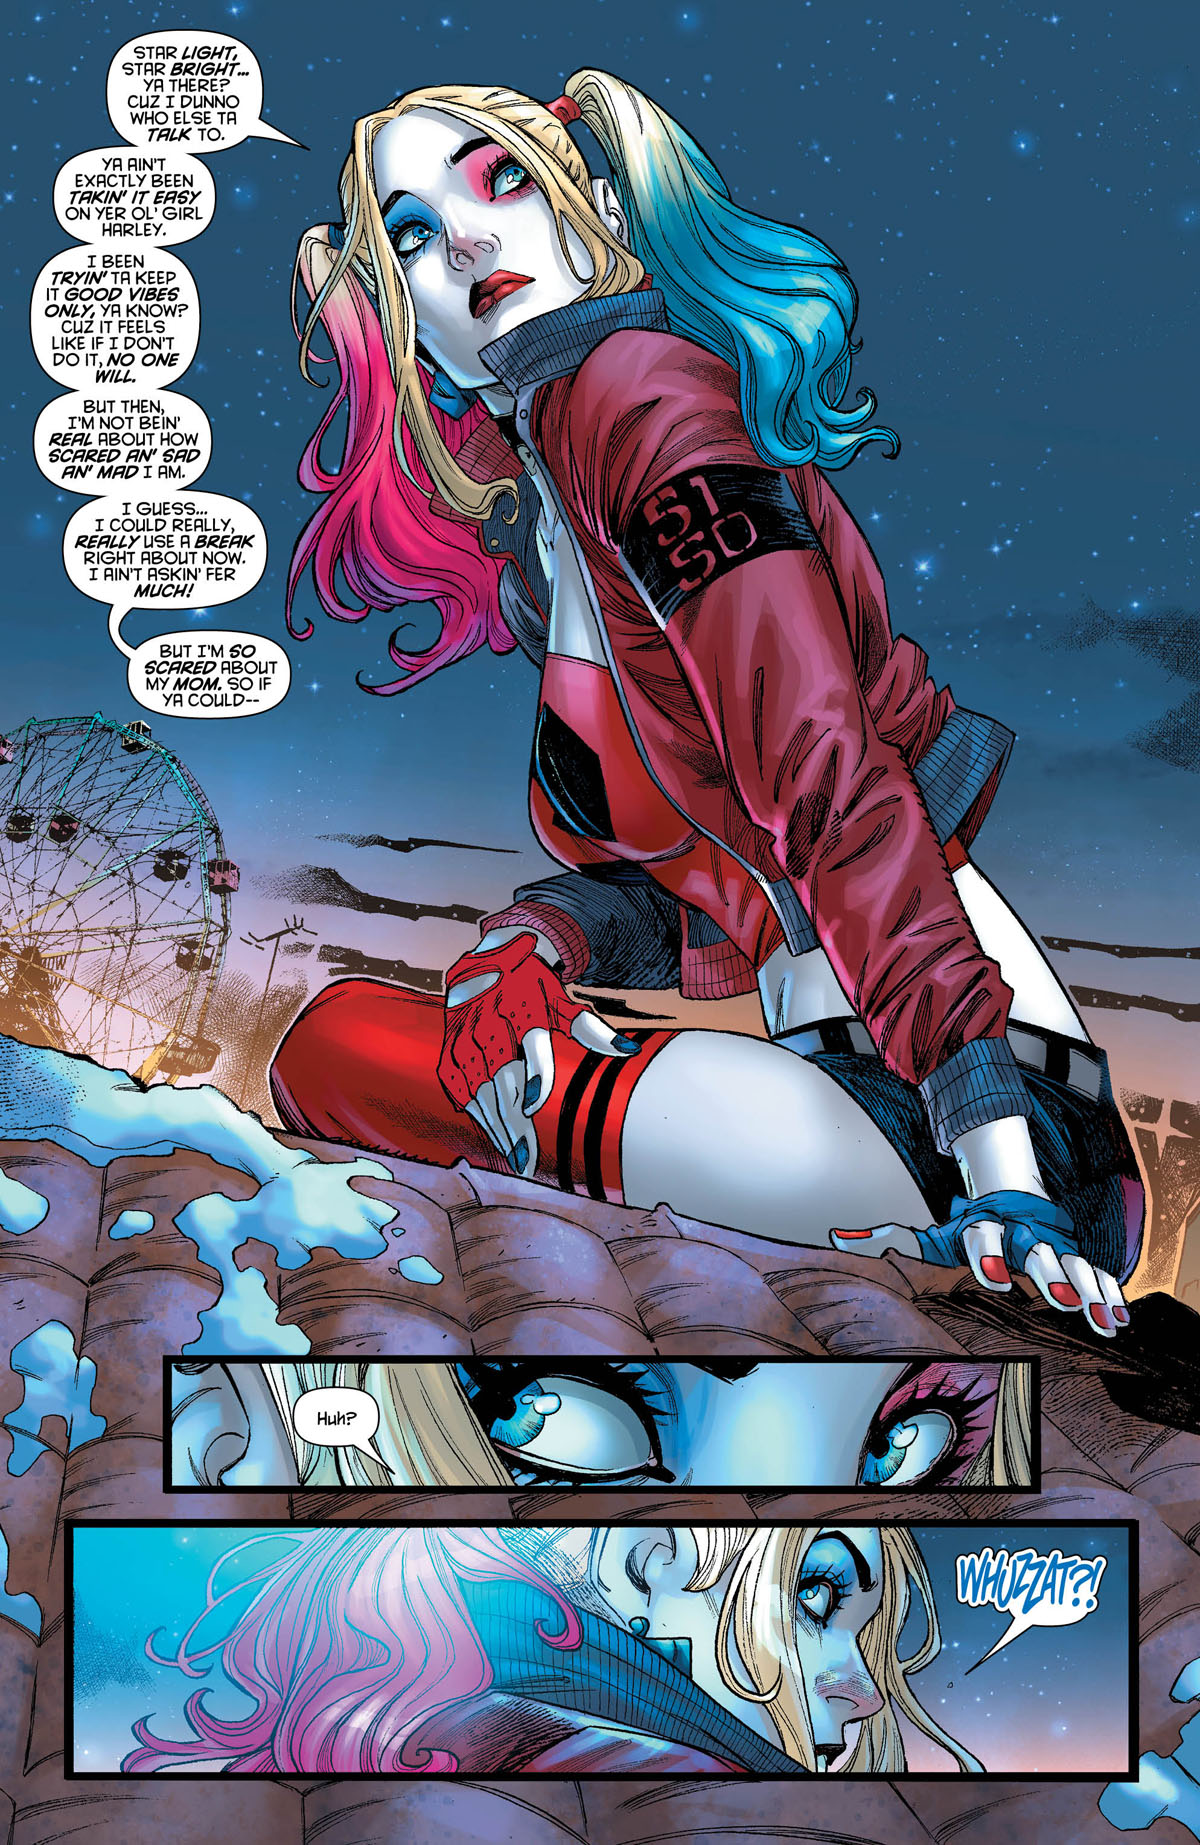 Harley Quinn #57 page 1